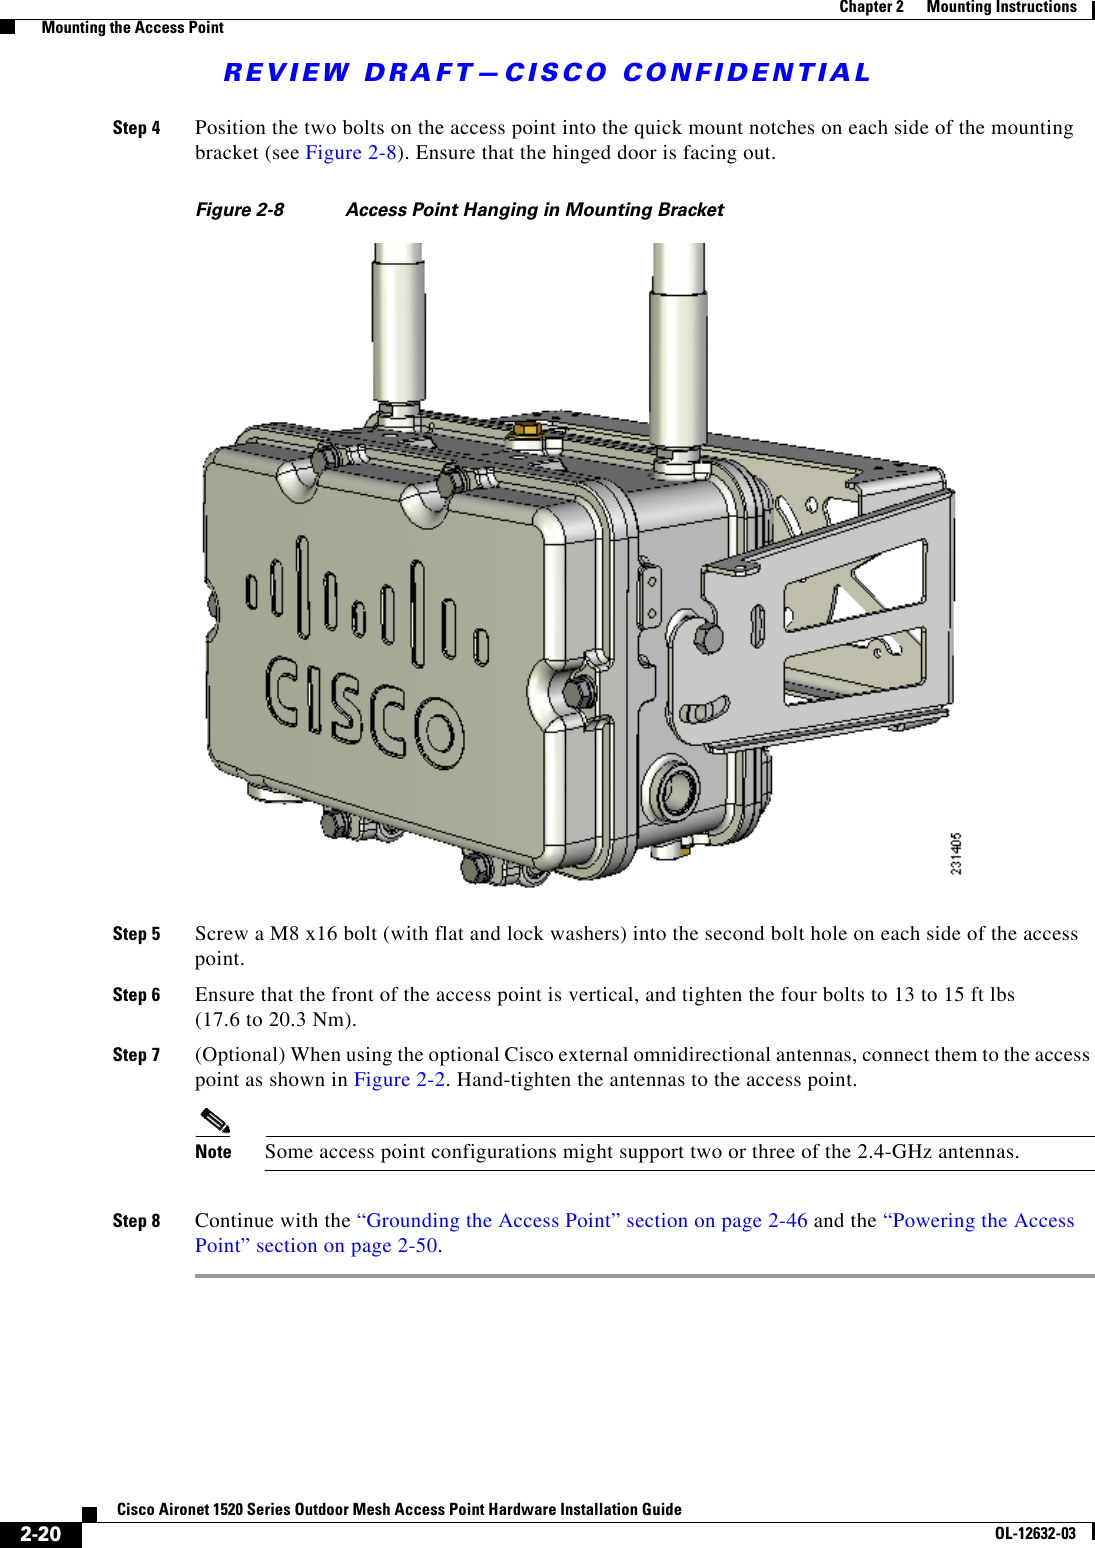 REVIEW DRAFT—CISCO CONFIDENTIAL2-20Cisco Aironet 1520 Series Outdoor Mesh Access Point Hardware Installation GuideOL-12632-03Chapter 2      Mounting Instructions  Mounting the Access PointStep 4 Position the two bolts on the access point into the quick mount notches on each side of the mounting bracket (see Figure 2-8). Ensure that the hinged door is facing out.Figure 2-8 Access Point Hanging in Mounting BracketStep 5 Screw a M8 x16 bolt (with flat and lock washers) into the second bolt hole on each side of the access point. Step 6 Ensure that the front of the access point is vertical, and tighten the four bolts to 13 to 15 ft lbs  (17.6 to 20.3 Nm).Step 7 (Optional) When using the optional Cisco external omnidirectional antennas, connect them to the access point as shown in Figure 2-2. Hand-tighten the antennas to the access point.Note Some access point configurations might support two or three of the 2.4-GHz antennas.Step 8 Continue with the “Grounding the Access Point” section on page 2-46 and the “Powering the Access Point” section on page 2-50.